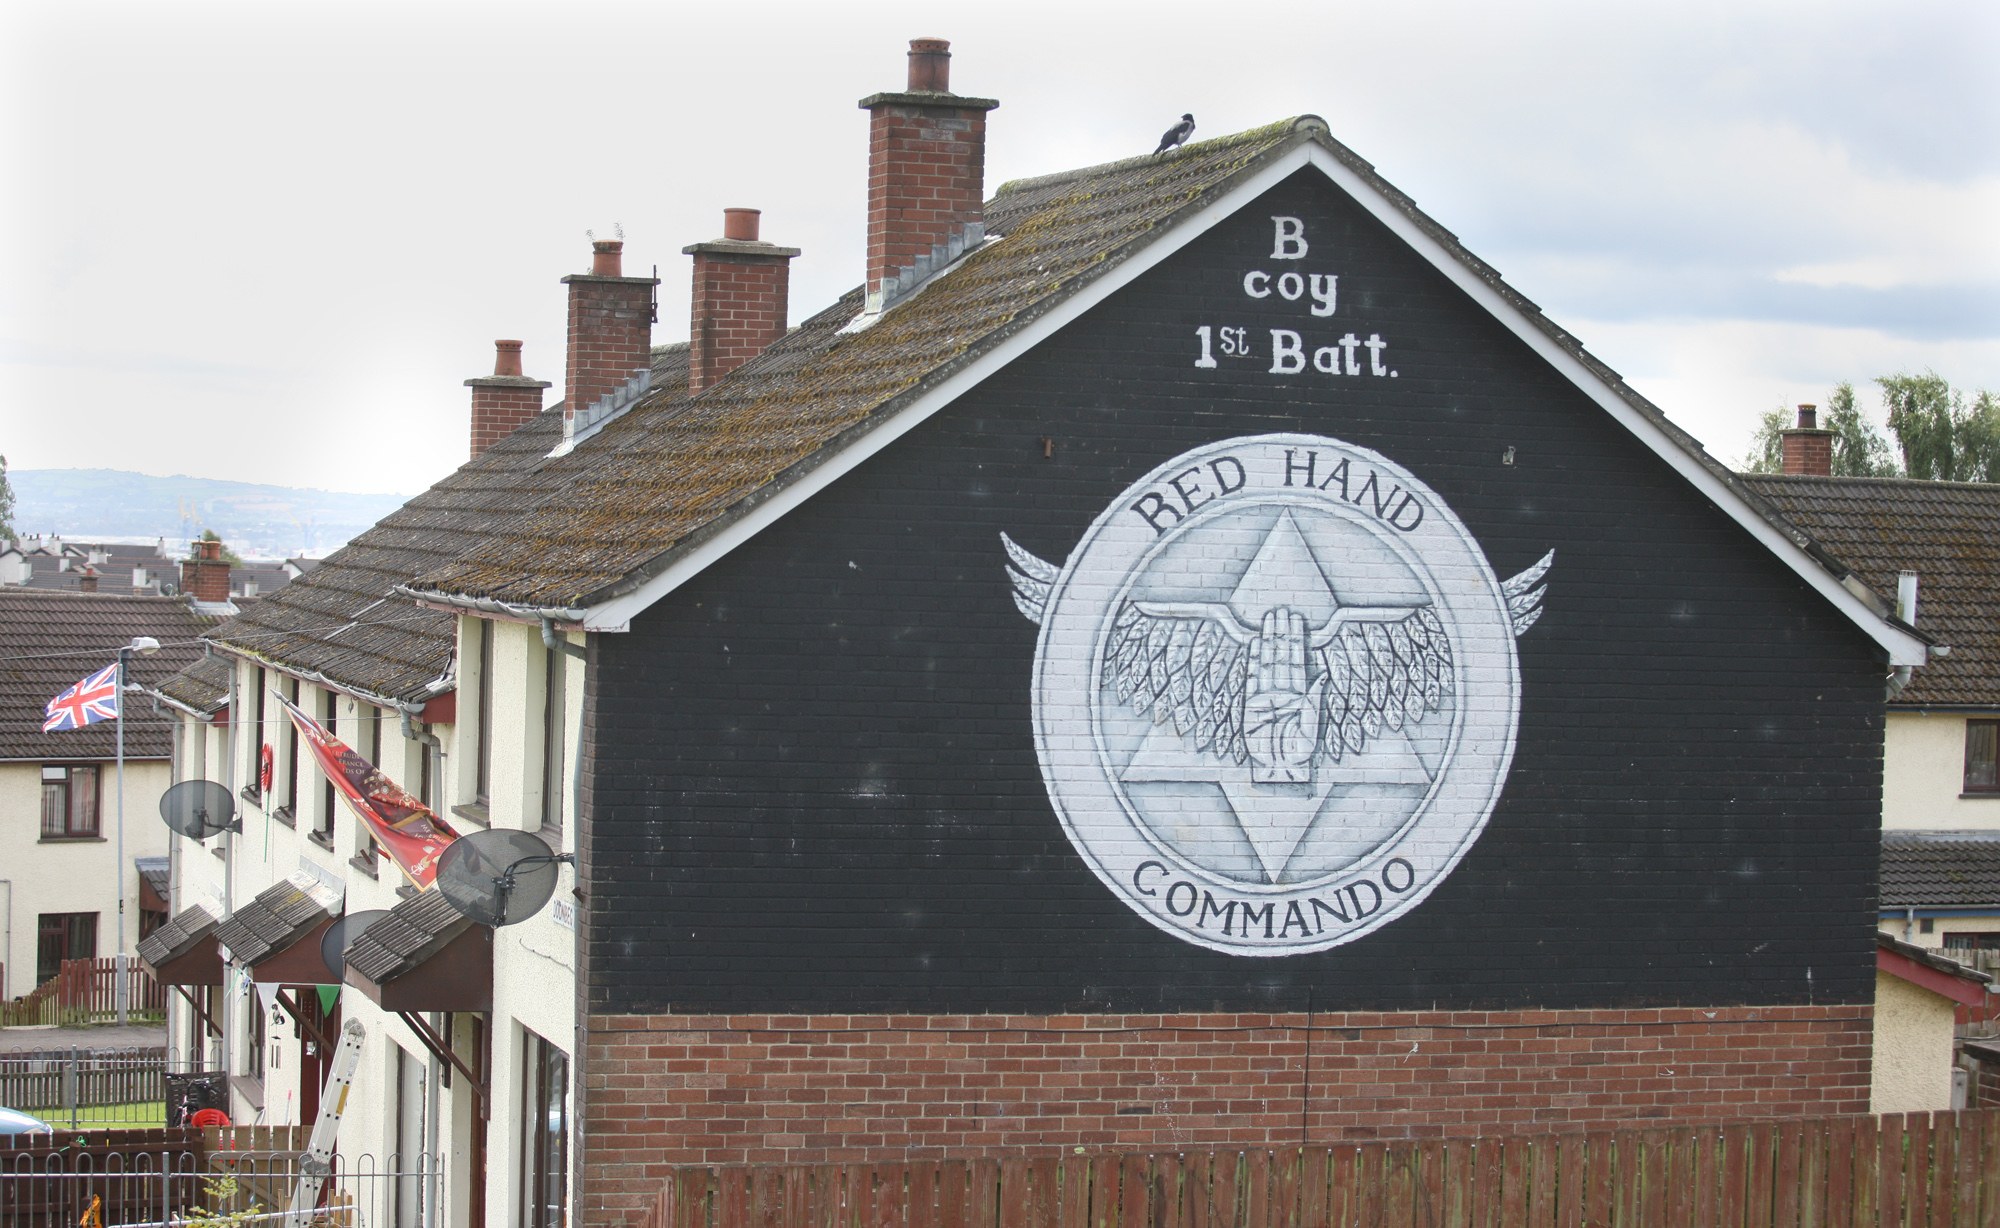 A Red Hand Commando mural in Rathcoole